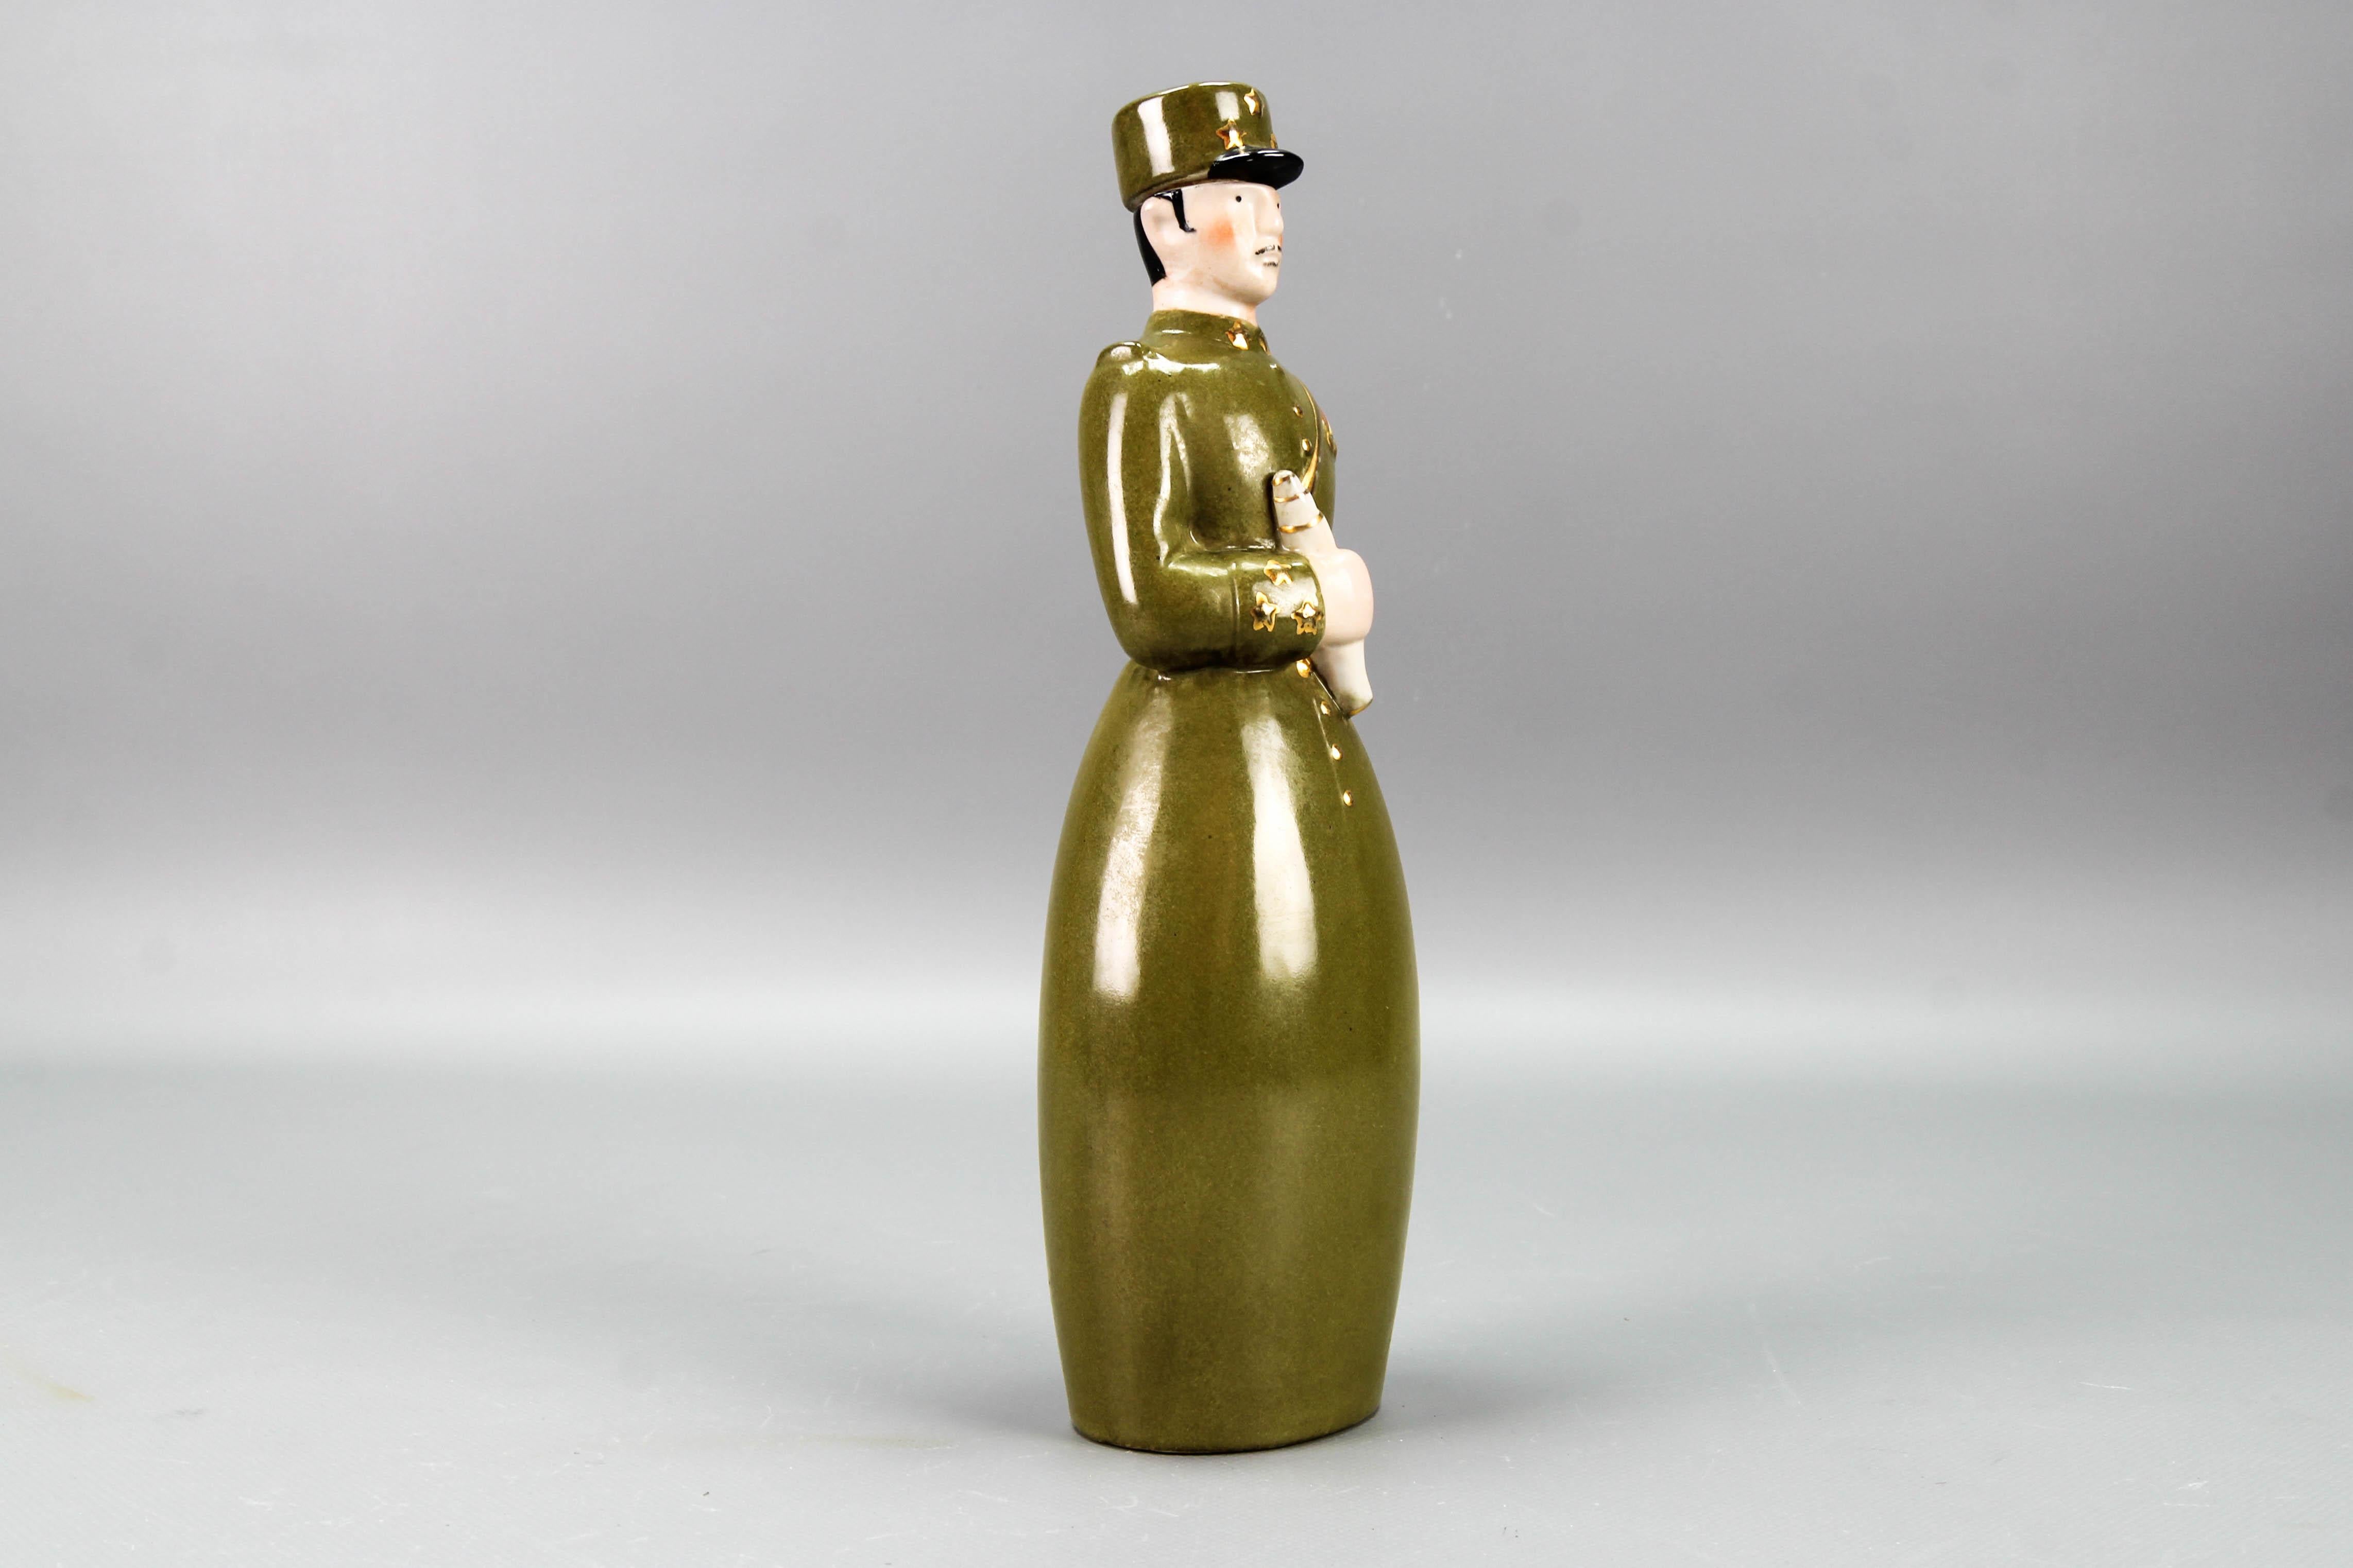 Early 20th Century  French Art Deco Ceramic Figural Bottle Brigadier General by Robj Paris, 1920s